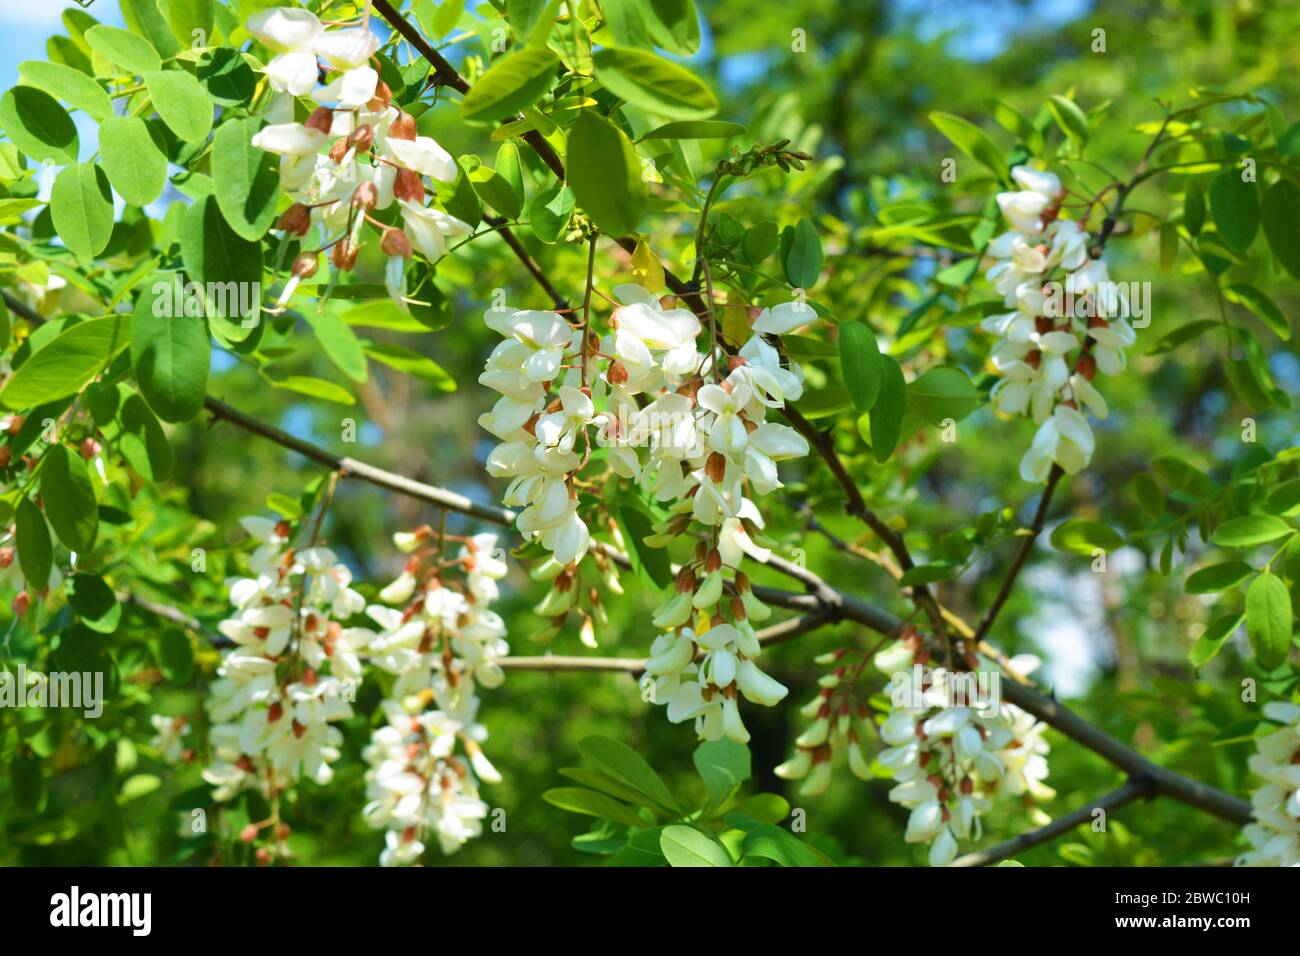 Bright colorful clusters of white flowers with green small leaves blossoming on an acacia tree. Natural nature, beautiful trees and flowers that are i Stock Photo